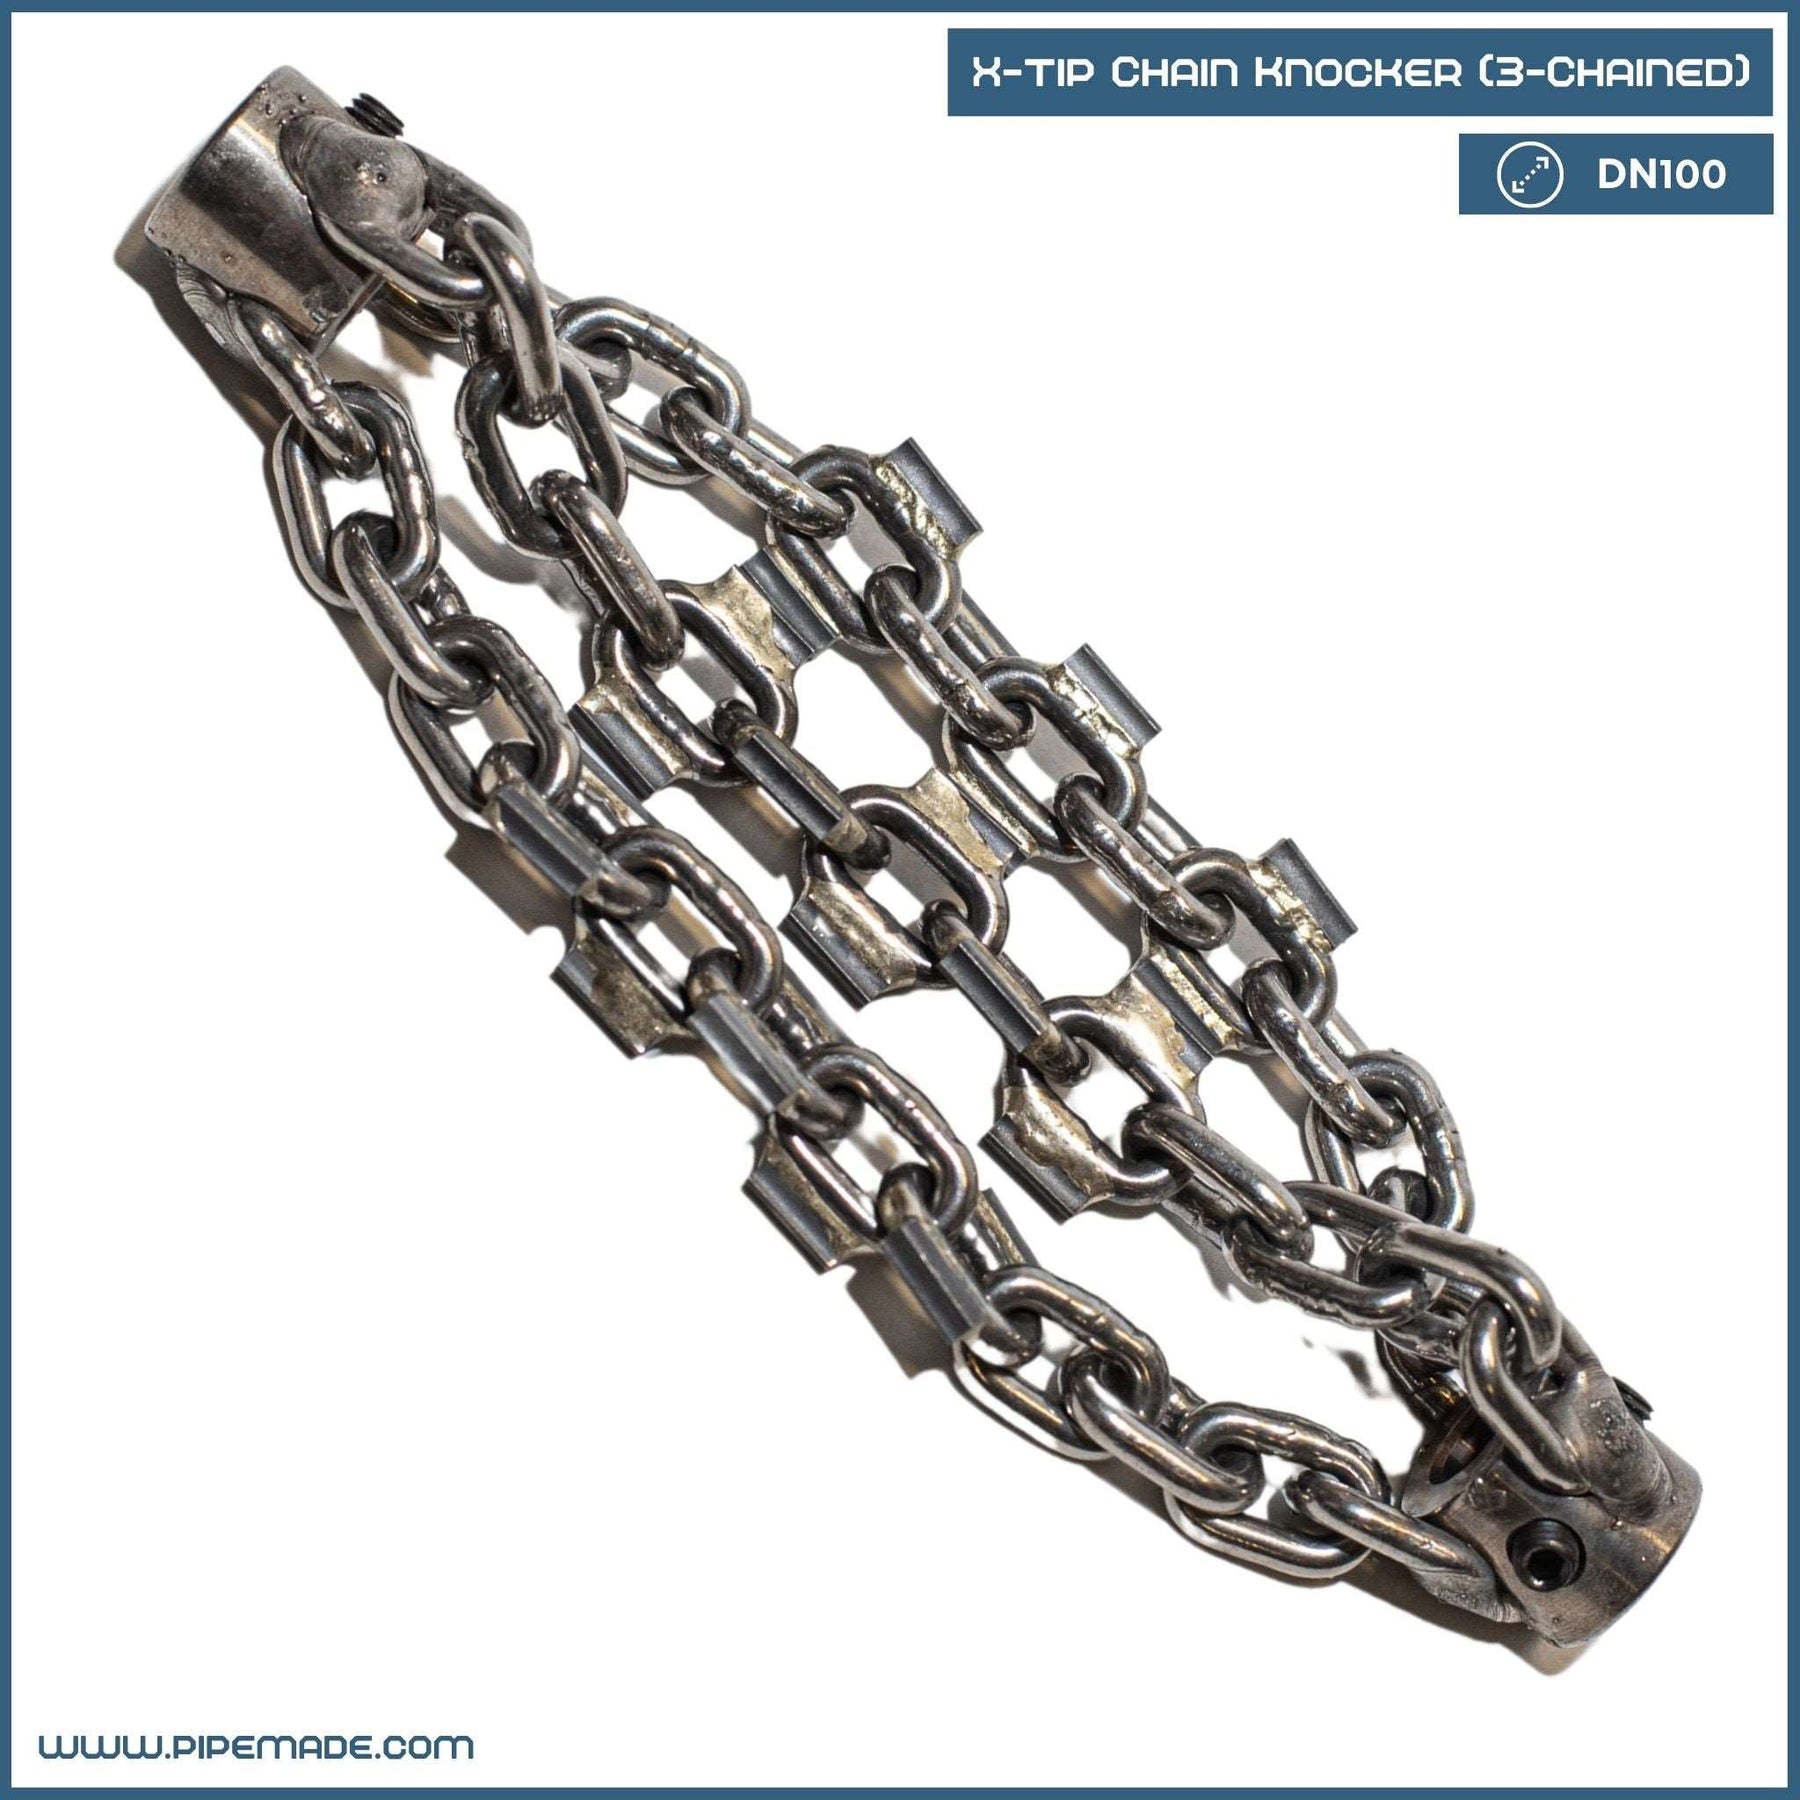 X-Tip Chain Knocker (3-Chained) | X-tip Chain Knockers. Cleaning Chains | Zewer | zewer-x-tip-chain-knocker-3-chained